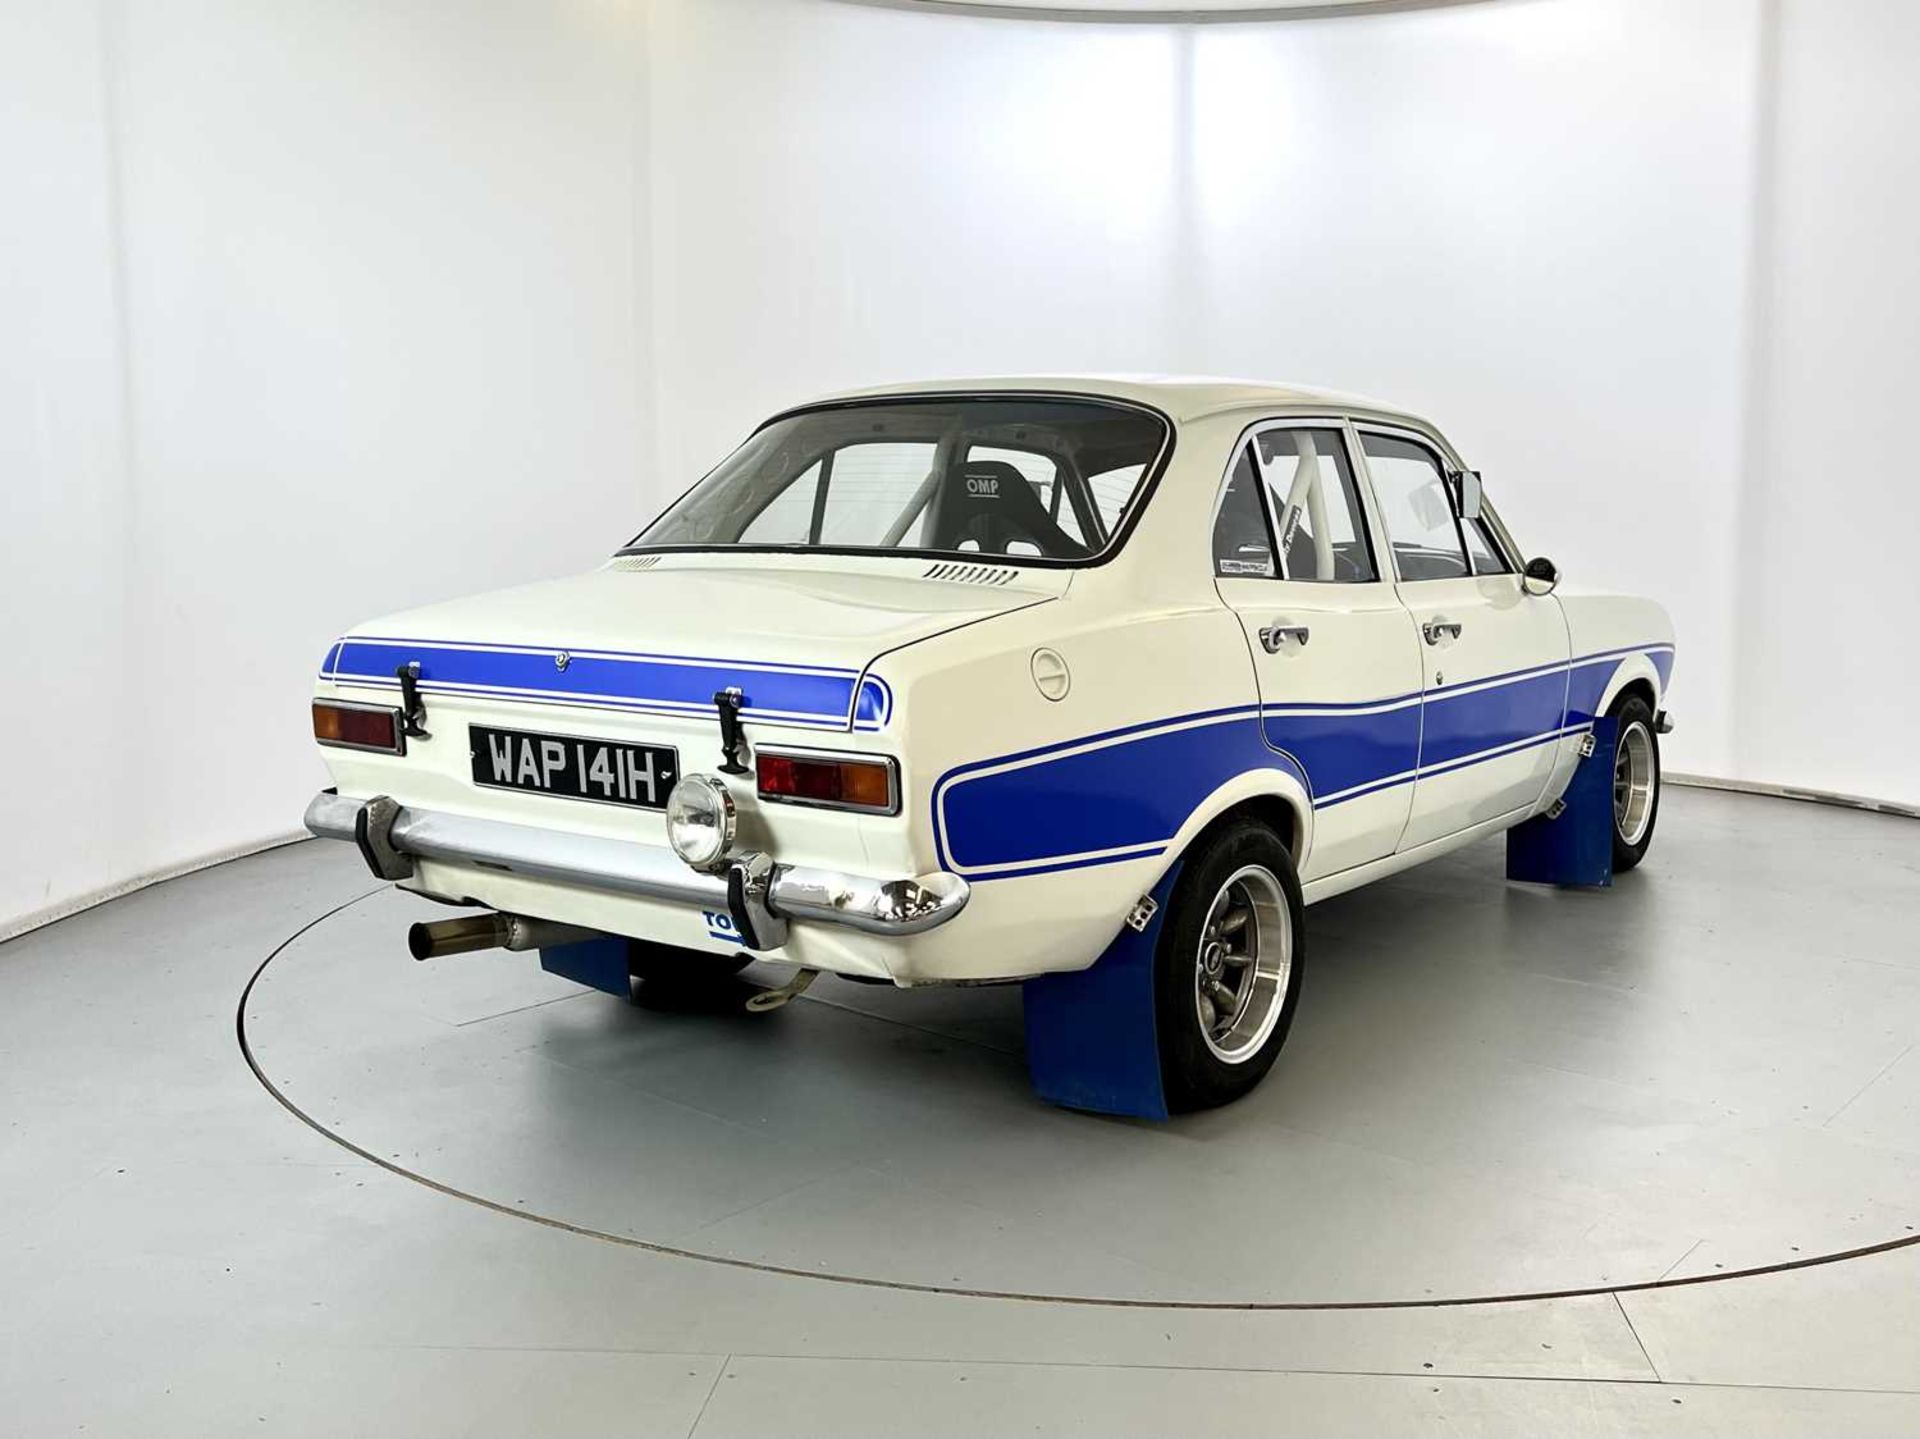 1970 Ford Escort - Image 9 of 30